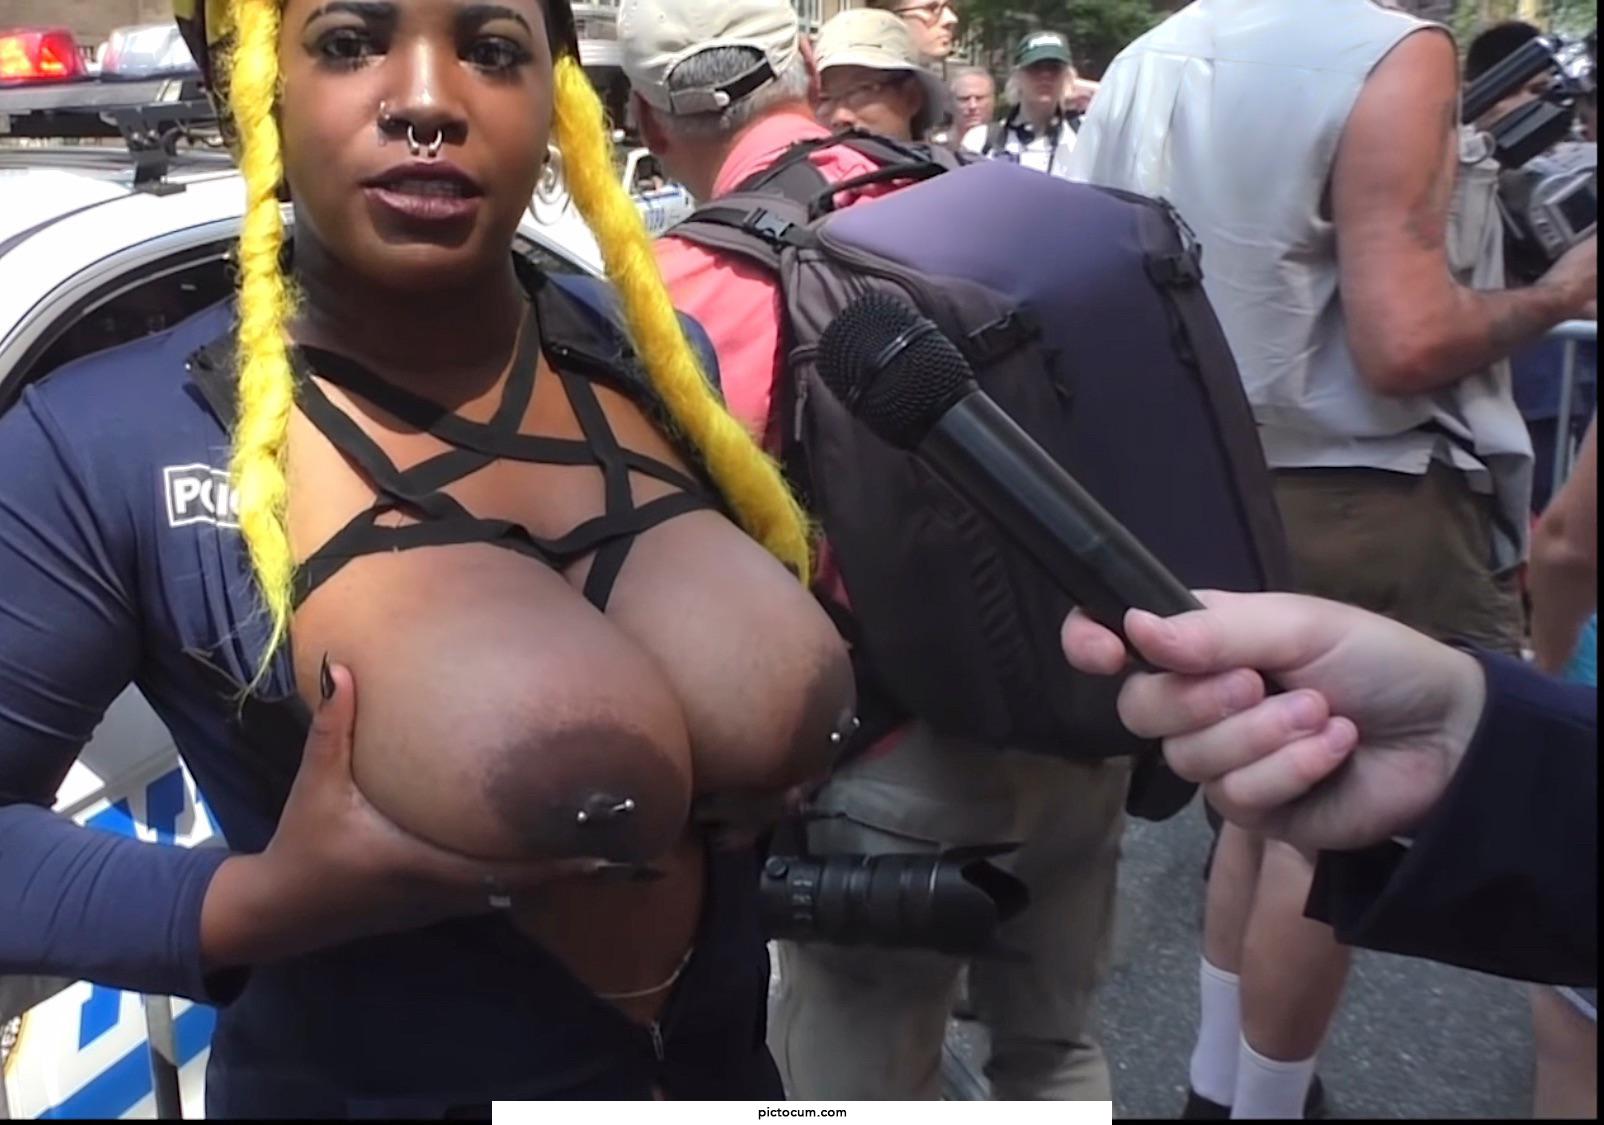 Does NYC Topless parade count?